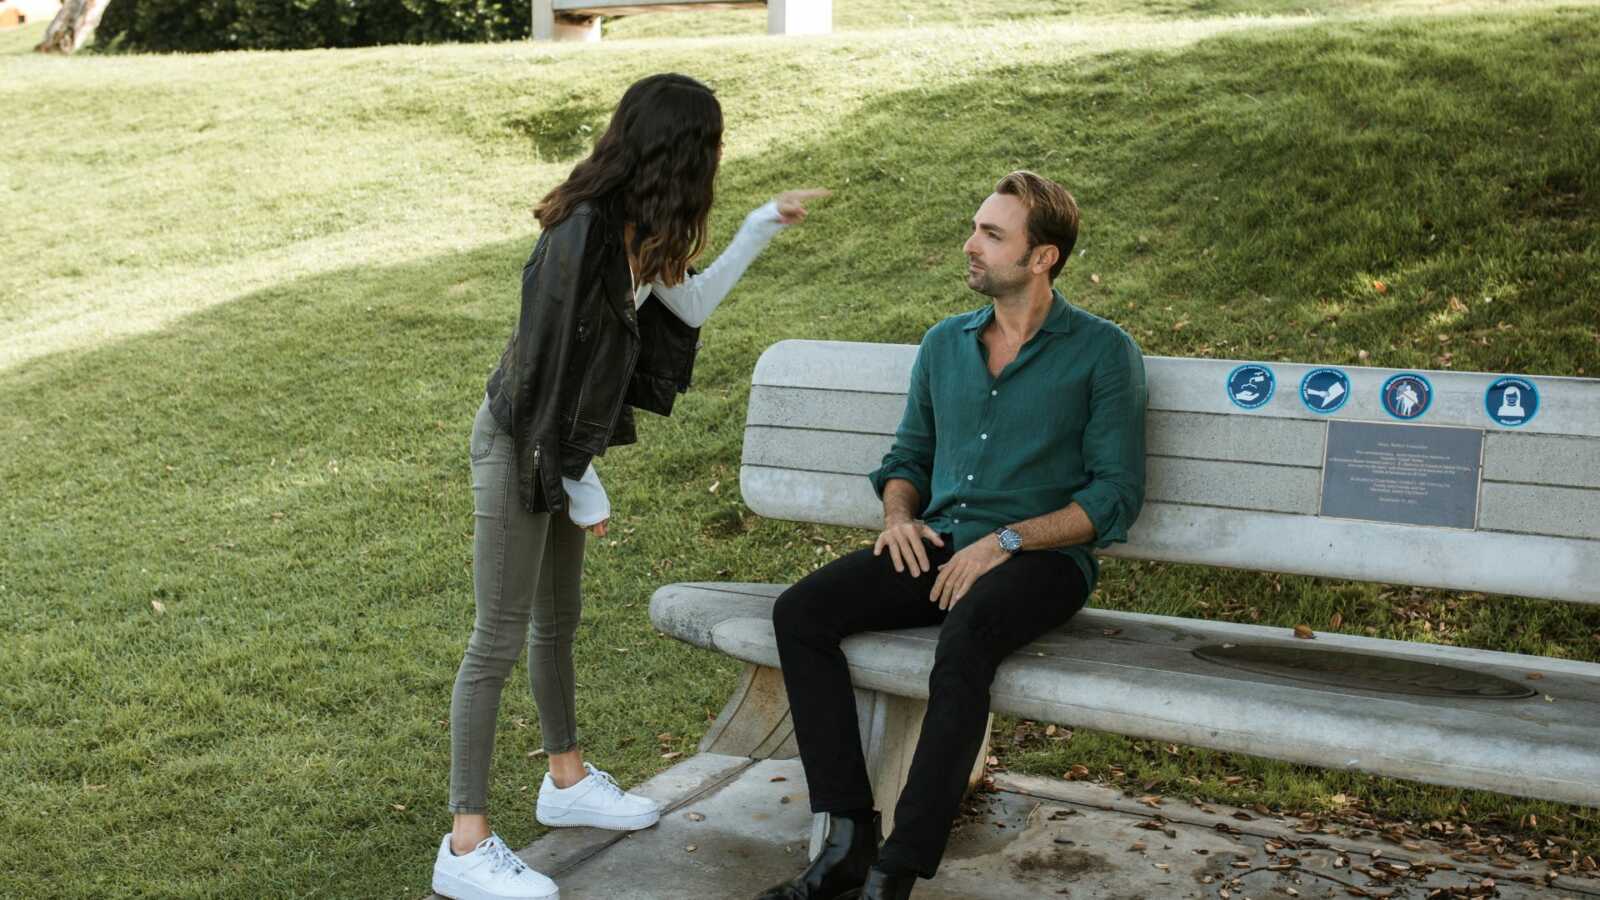 Woman angrily pointing at man on wooden bench